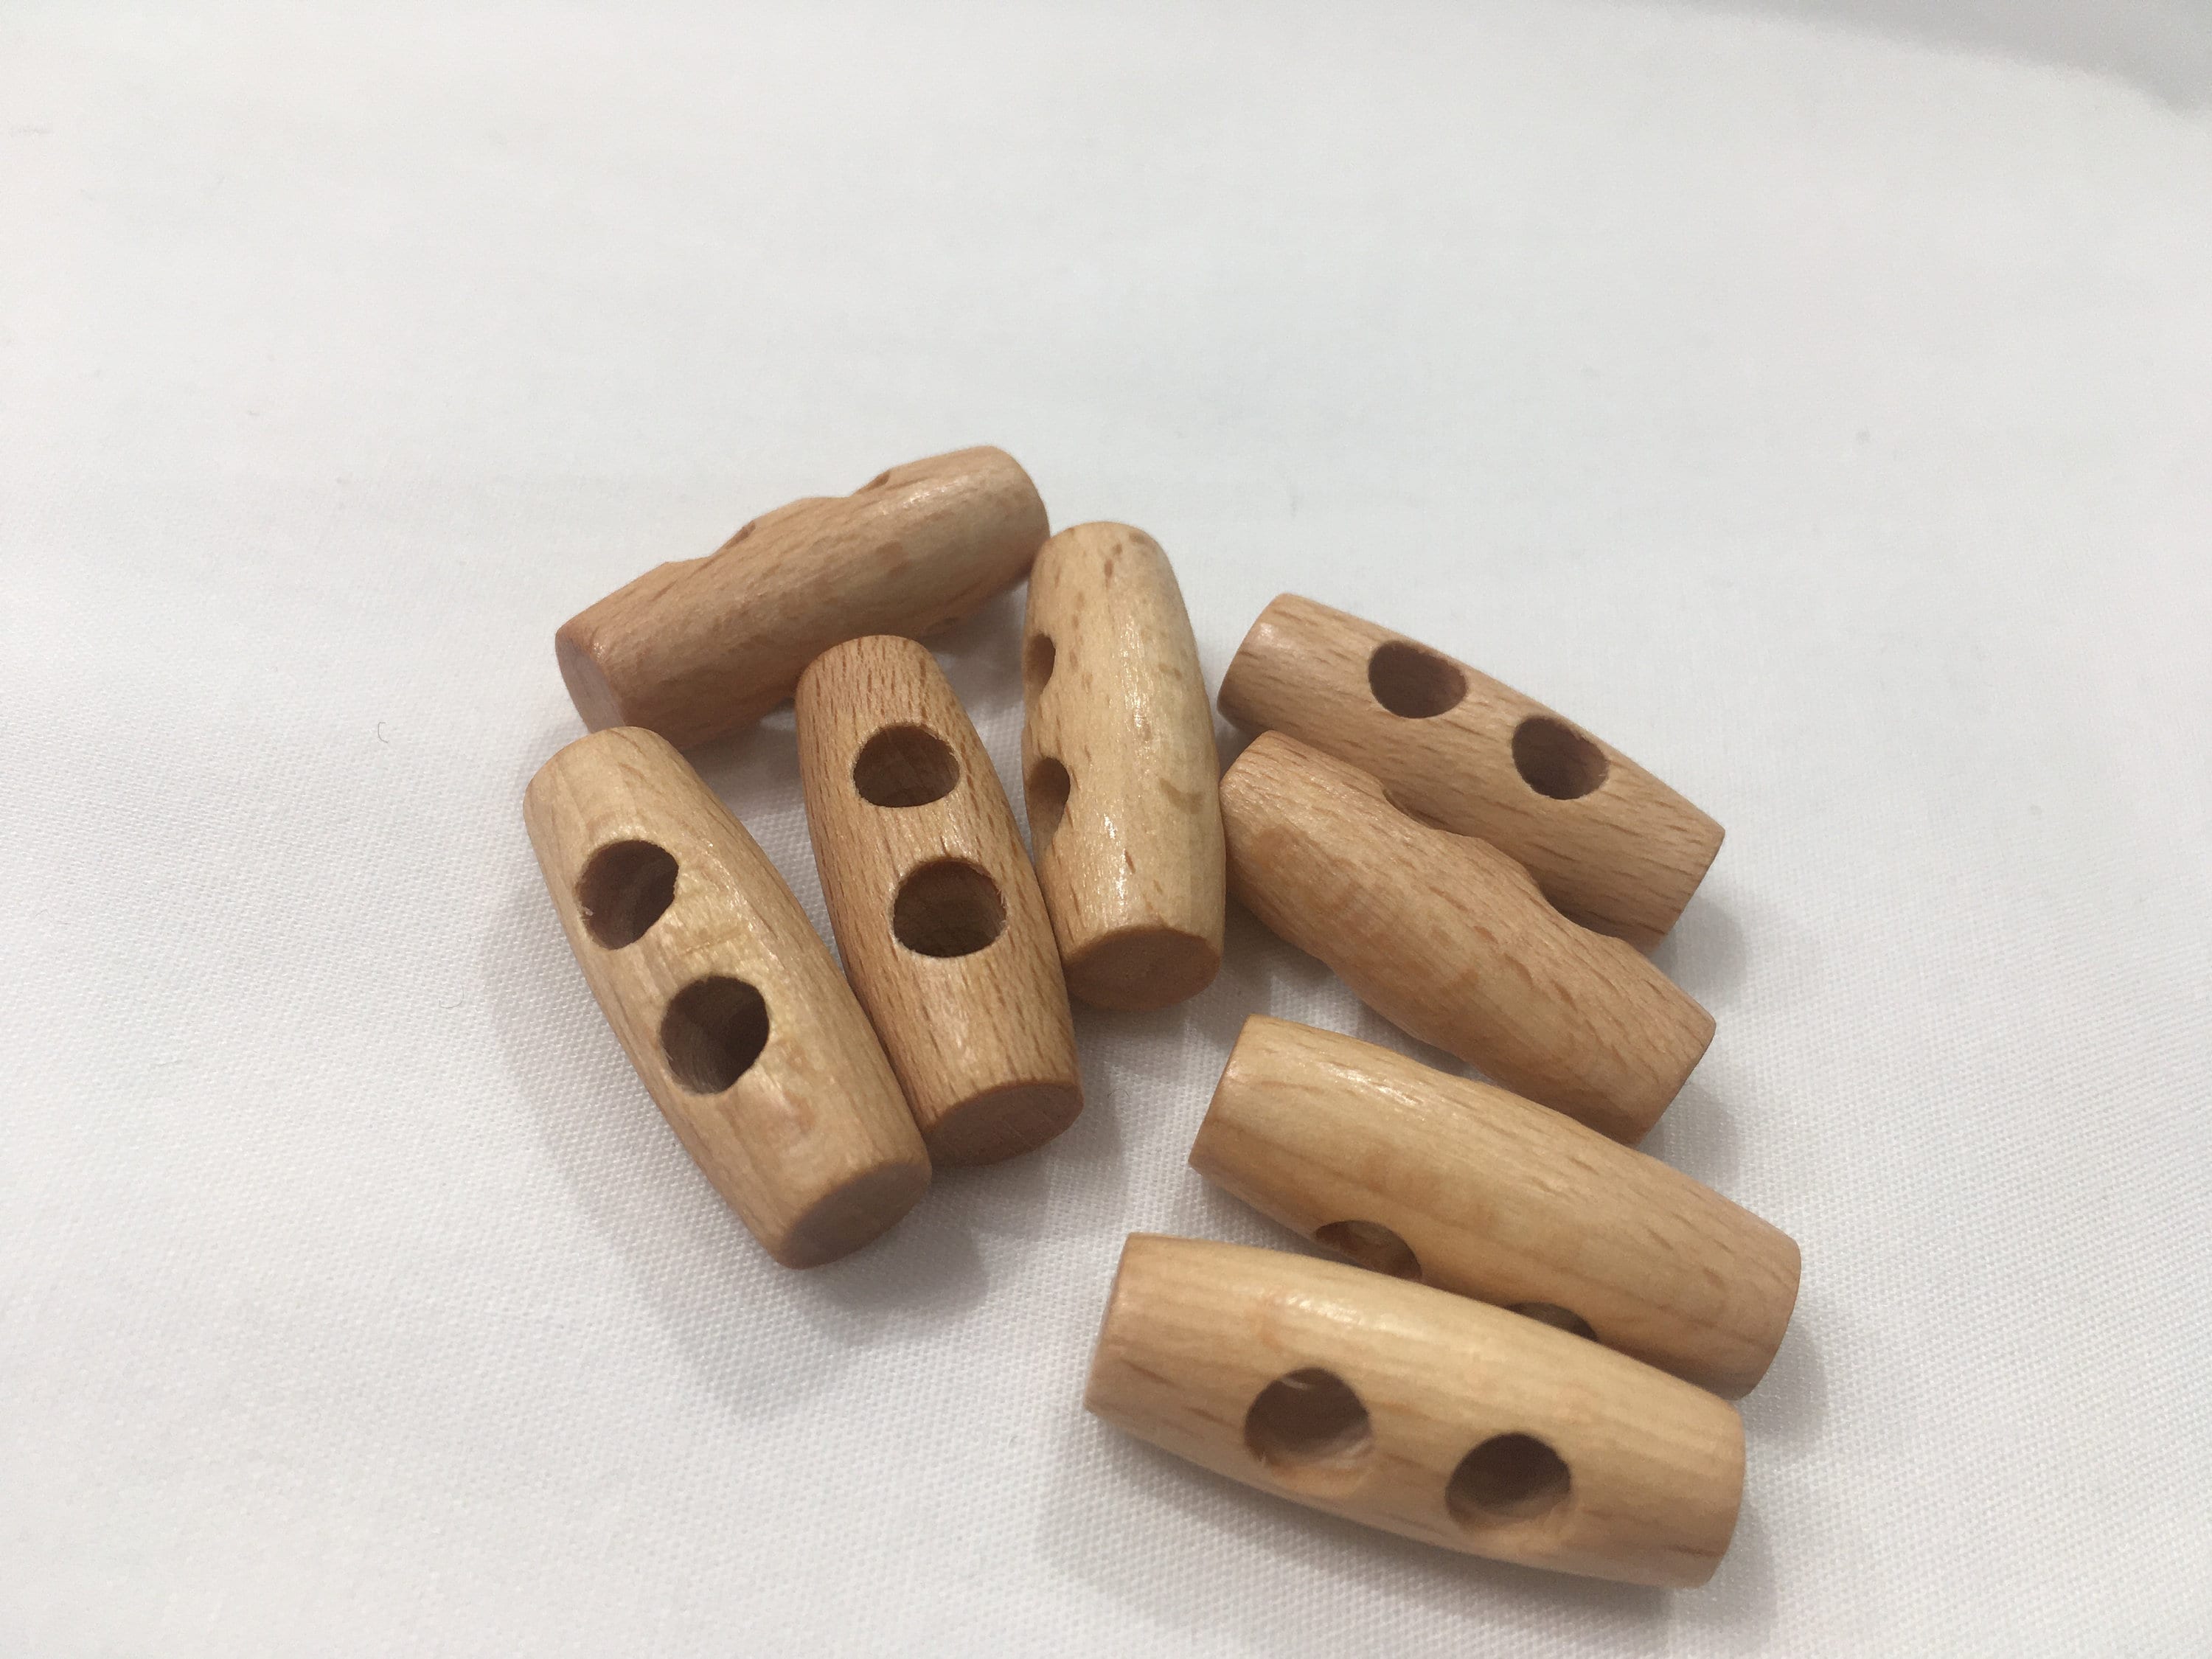 2 wooden buttons 4 holes / 80, 38 or 51 mm / big buttons in natural wood